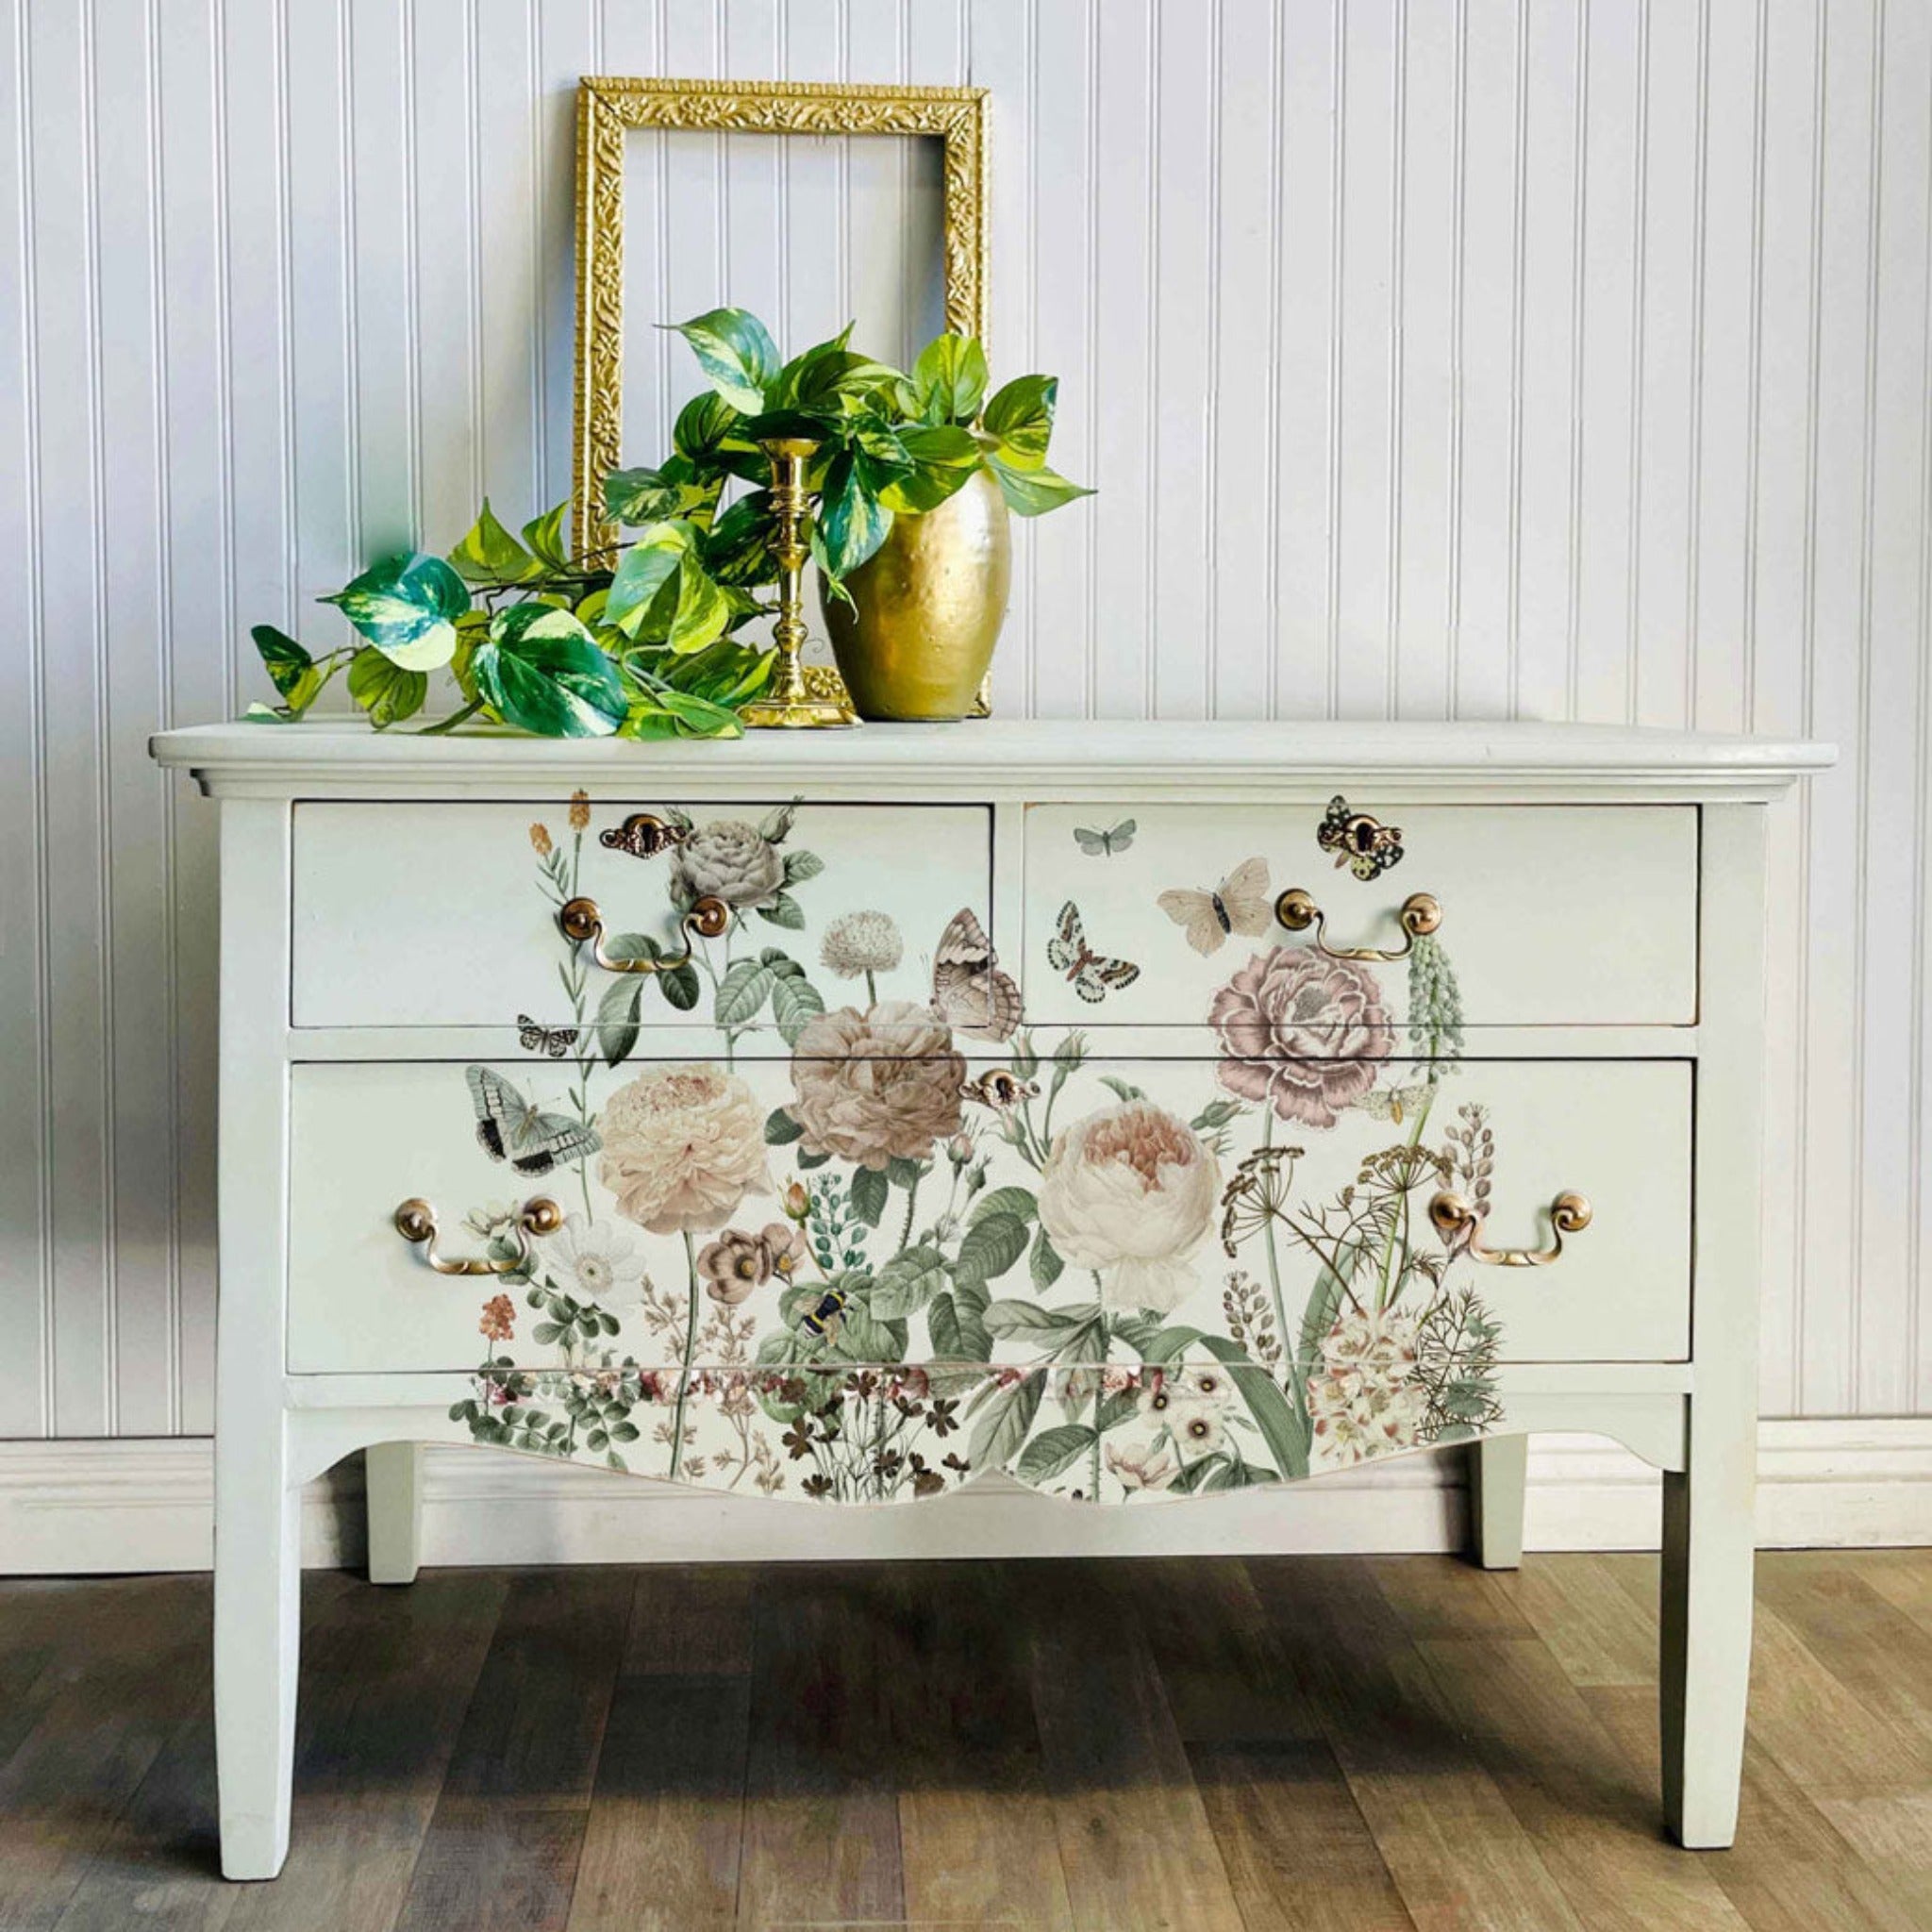 A vintage 3-drawer dresser with long legs is painted off-white and features ReDesign with Prima's All the Flowers transfer on the front.